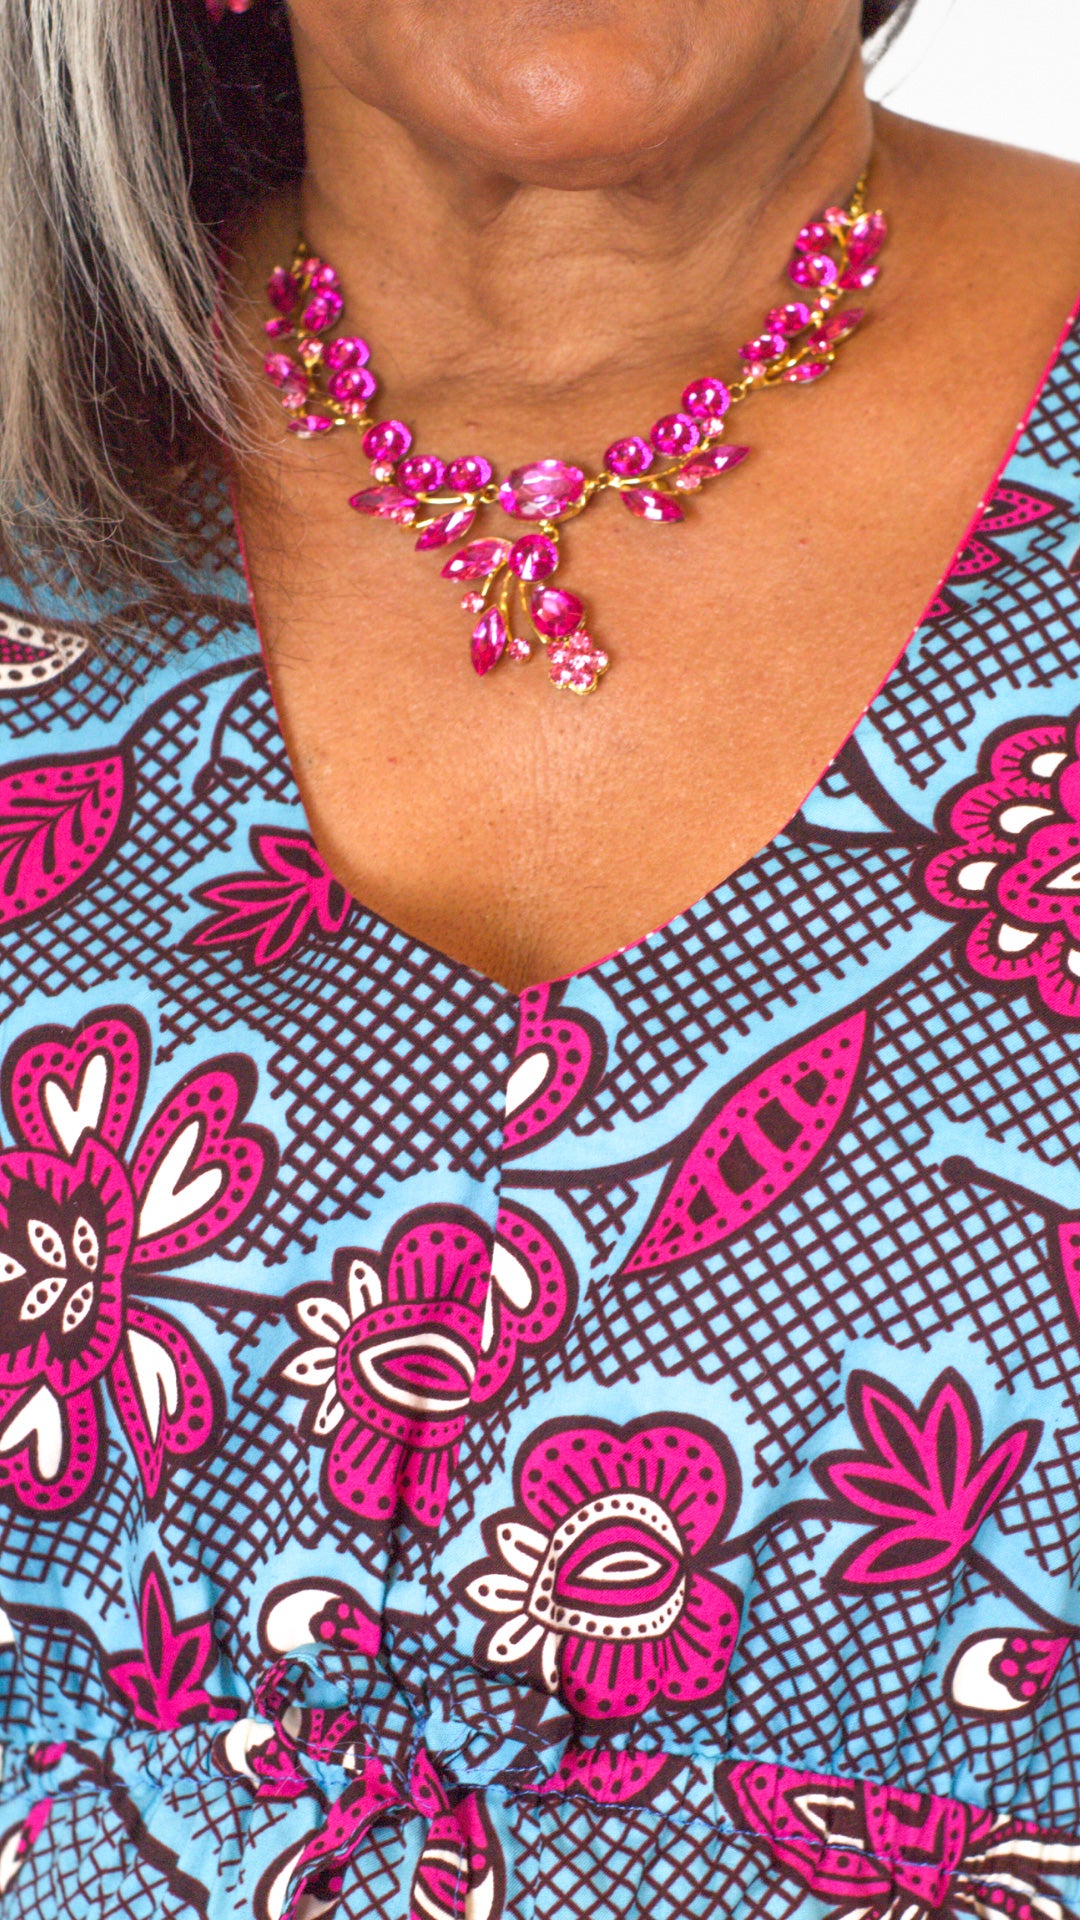 A close-up view focusing on the neckline of the blue print kaftan-style dress with pink elements. 